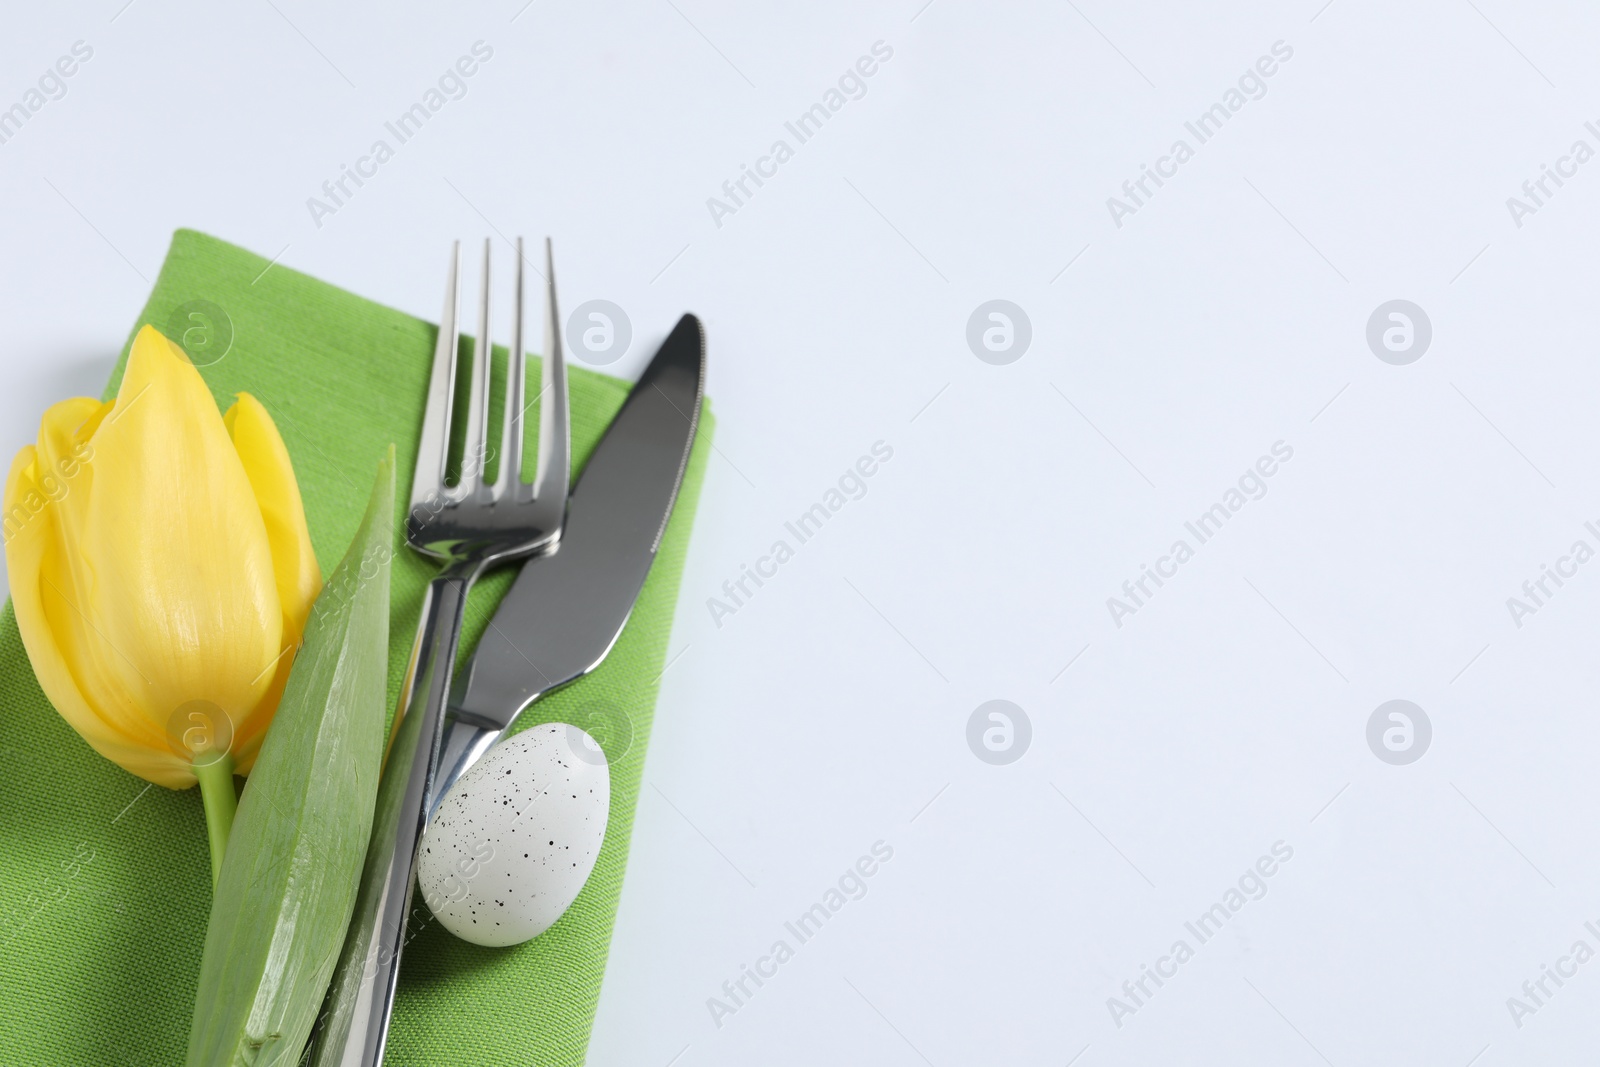 Photo of Cutlery set, Easter egg and tulip on white background, space for text. Festive table setting